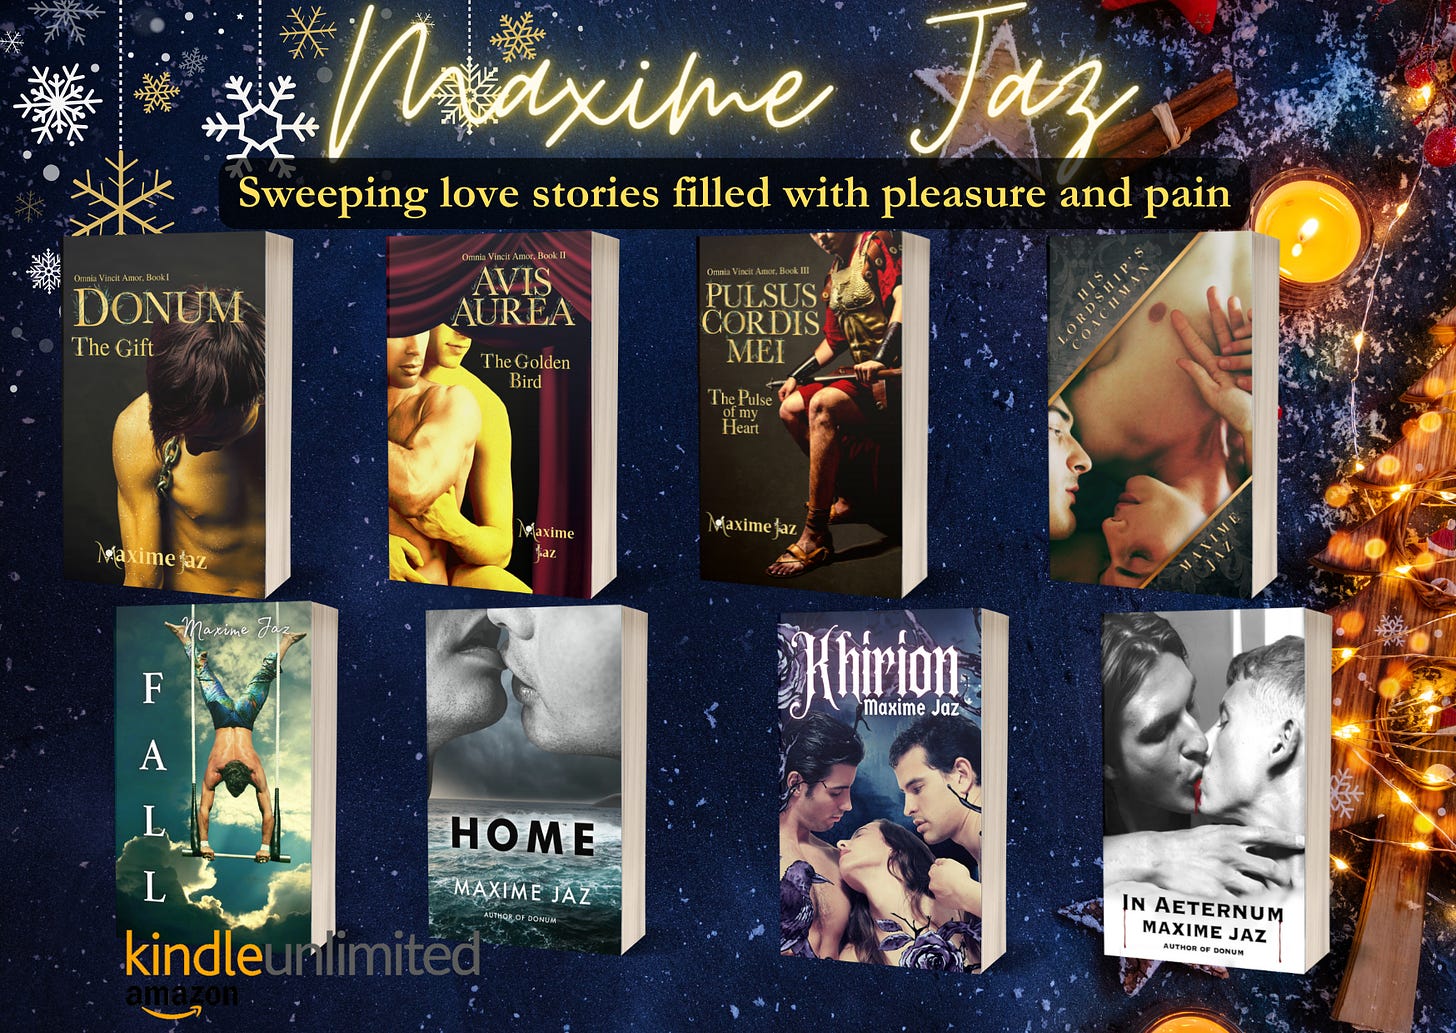 On blue xmas background with xmas decos Top in yellow glowing handwritten font Maxime Jaz Sweeping love stories filled with pleasure and pain. From left to right mockups of the books  Omnia Vincit trilogy Book 1,2,3  Donum, a young man half-naked head lowered, golden skin.  Avis Aurea, two men half-naked, one embracing the other from the back.  Pulsus Cordis Mei a Roman general sitting in his armor.  Fall- an acrobat doing a handstand on a trapeze swing.  Home- two men’s lips locking on top, in greyscale, a storm in the background and a frothy sea under their faces.  Khirion- There are three characters in the middle, naked, they are only visible to the shoulders, and chest for the left one. Two men framing a woman.  In Aeternum - greyscale photo of two men kissing, blood between their lips. In Aeternum Maxime Jaz Author of Donum in black letters His Lordship’s coachman – two men lying, their faces close, hands on one’s chest KU logo 